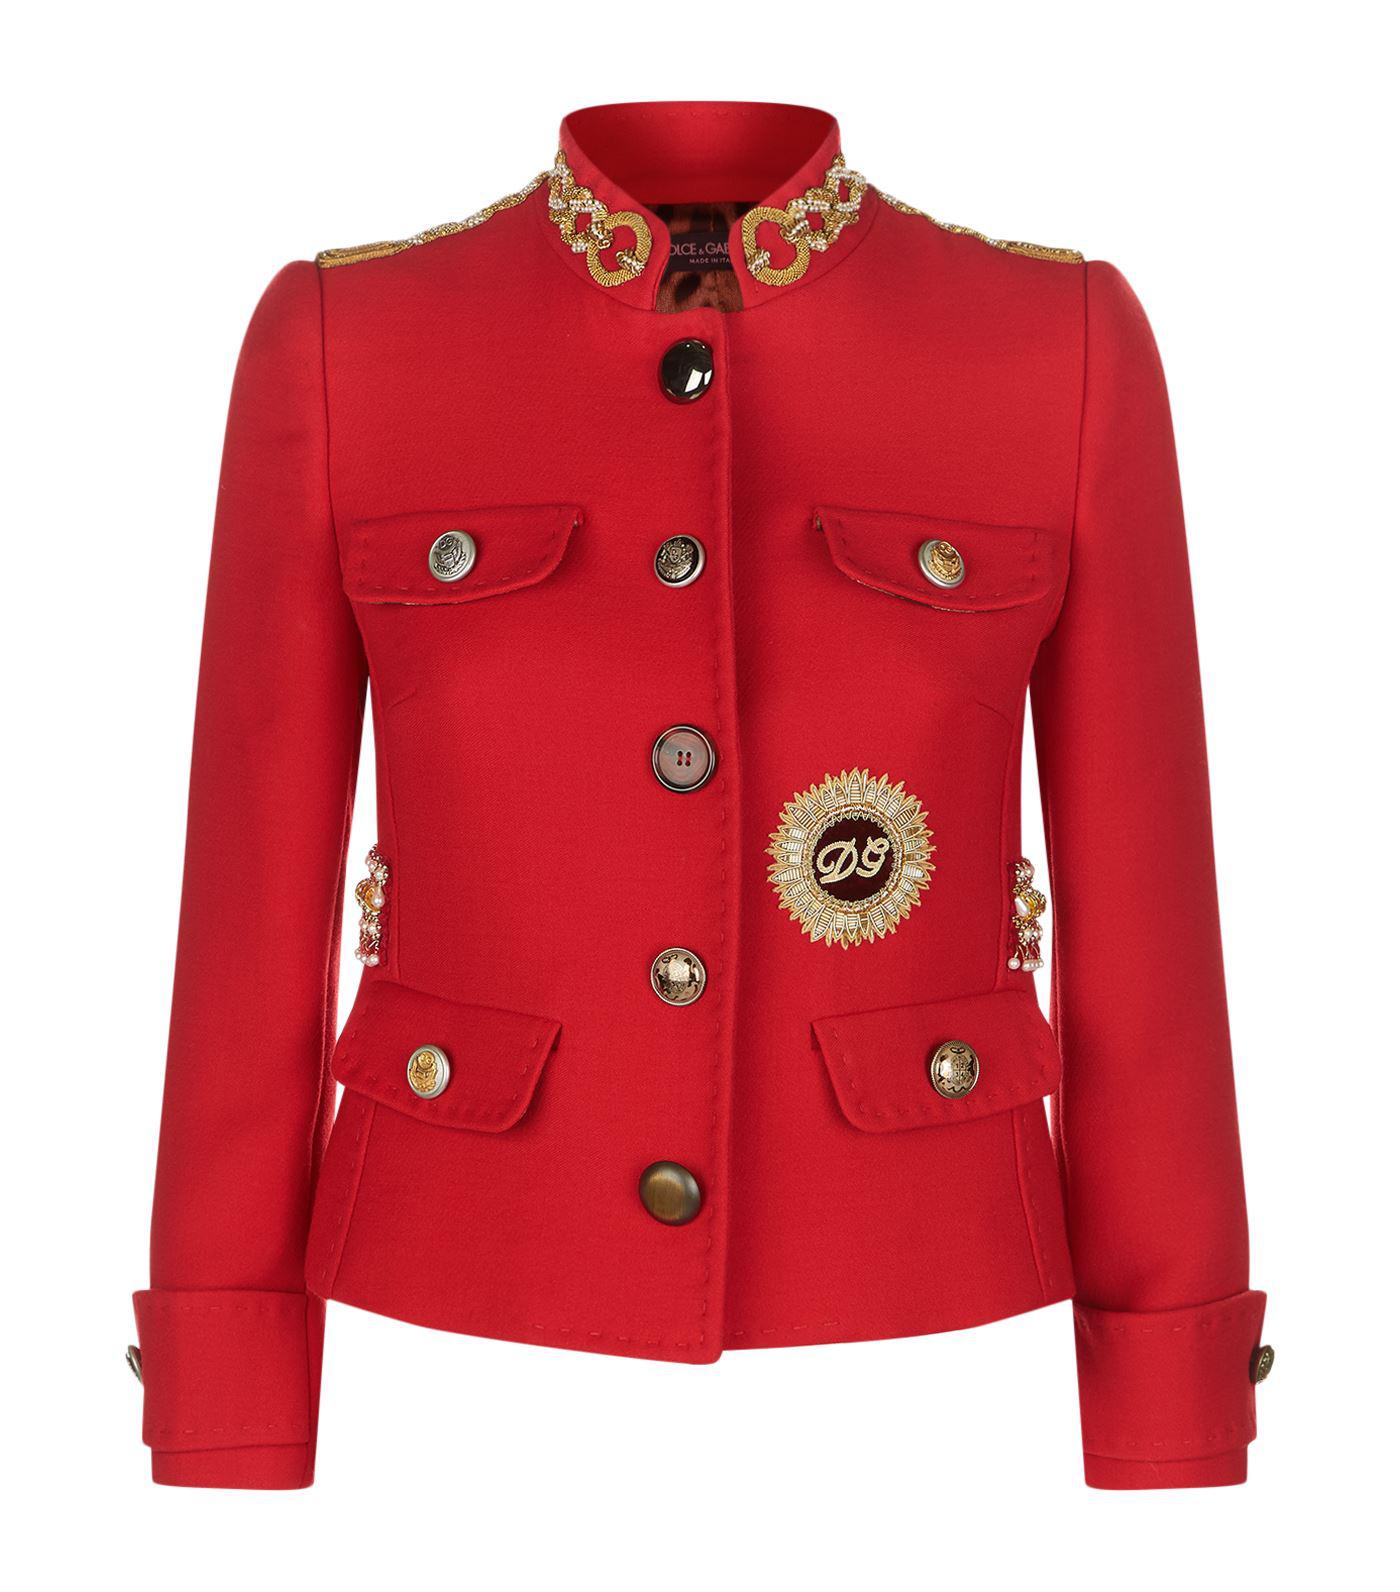 Lyst - Dolce & Gabbana Military Jacket in Red